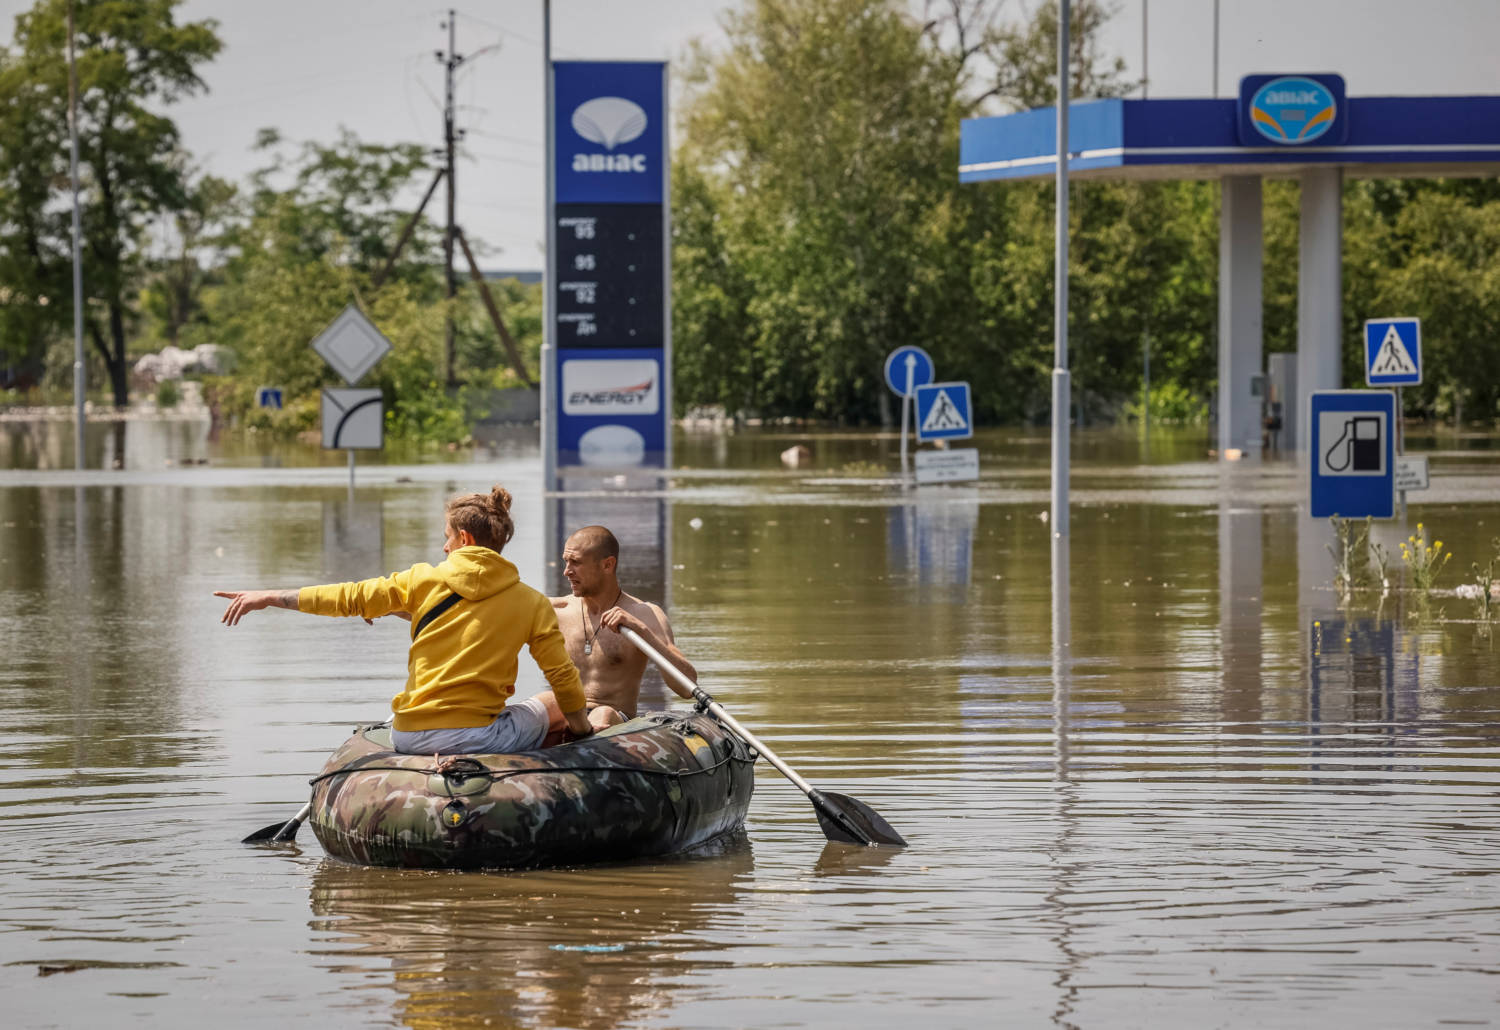 Local Residents Sail On A Boat At A Street During An Evacuation From A Flooded Area After The Nova Kakhovka Dam Breached In Kherson